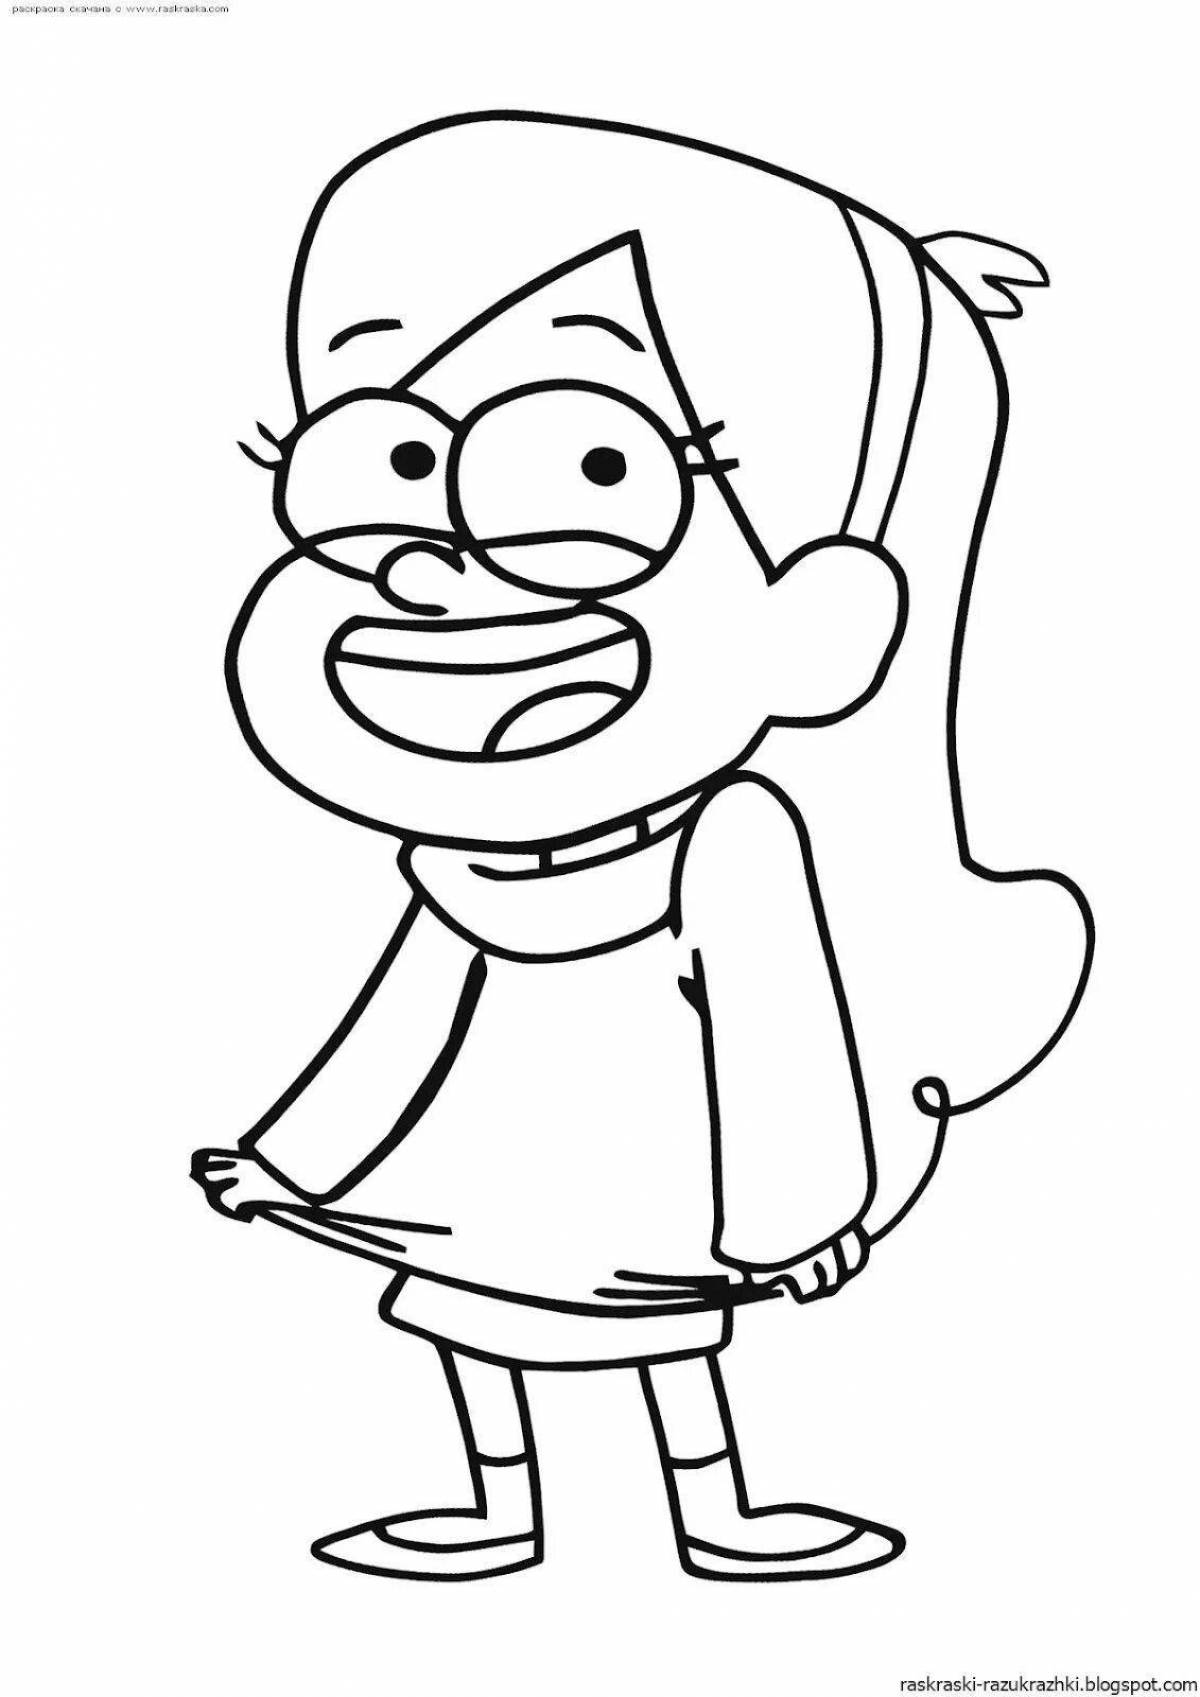 Animated gravity falls coloring page